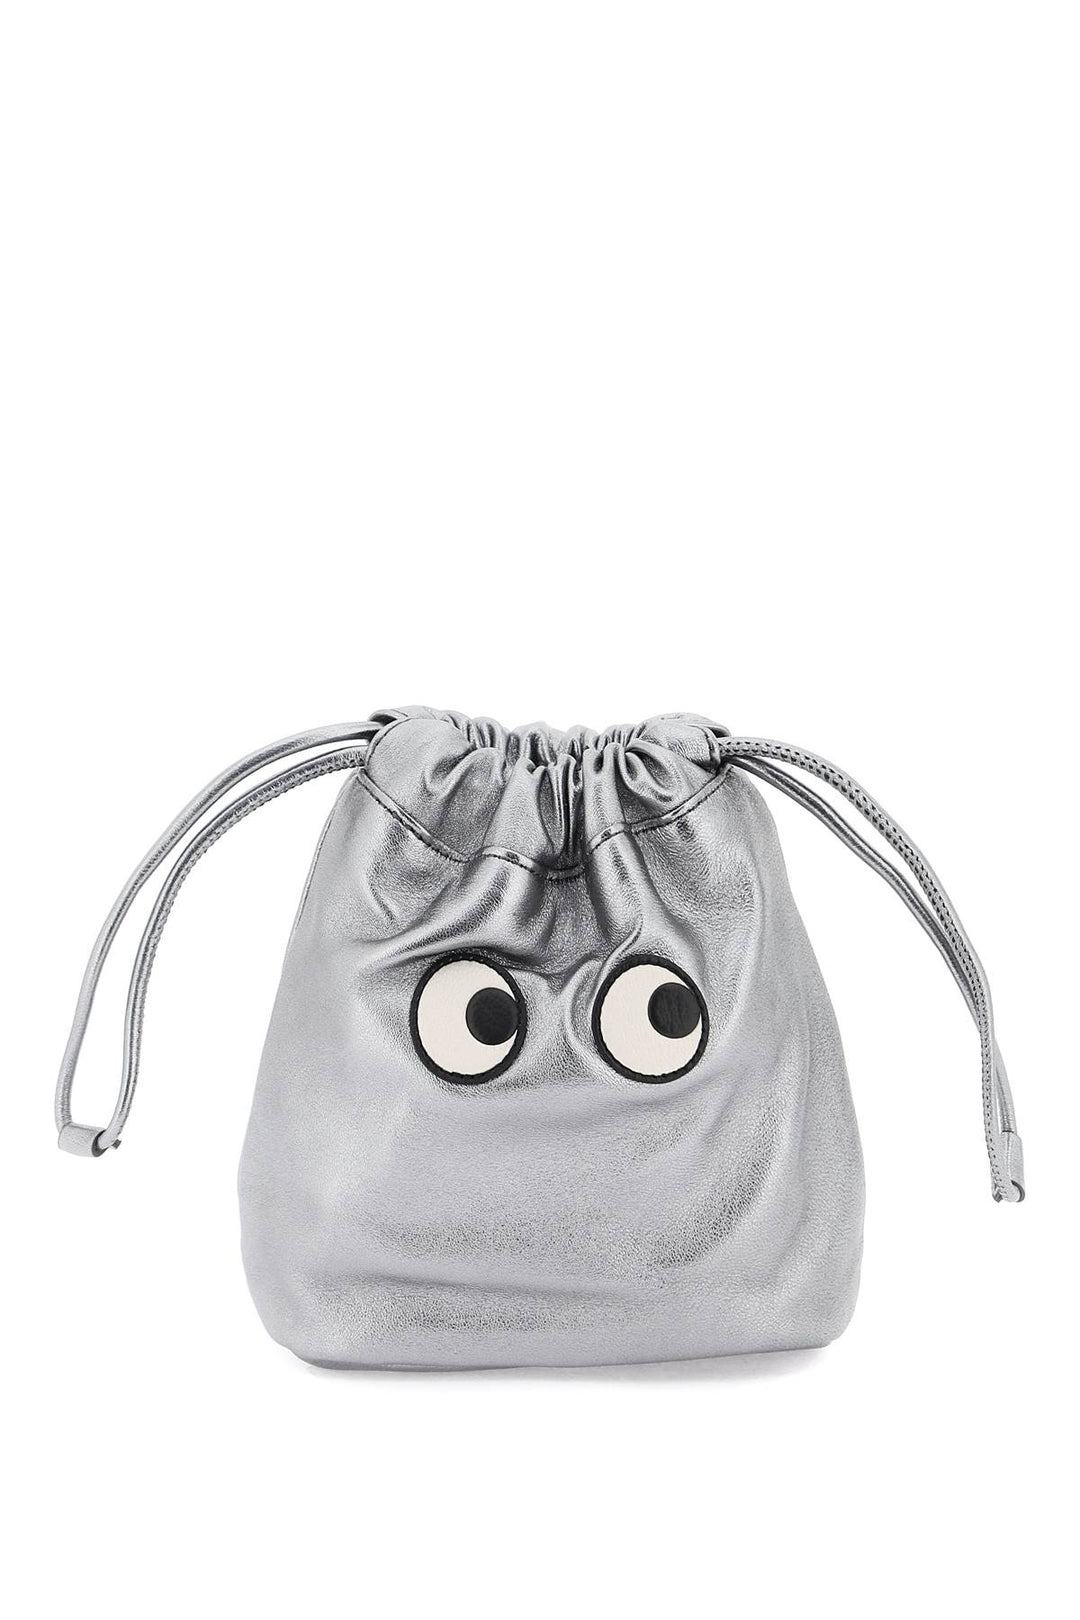 Pouch Eyes Con Coulisse - Anya Hindmarch - Donna